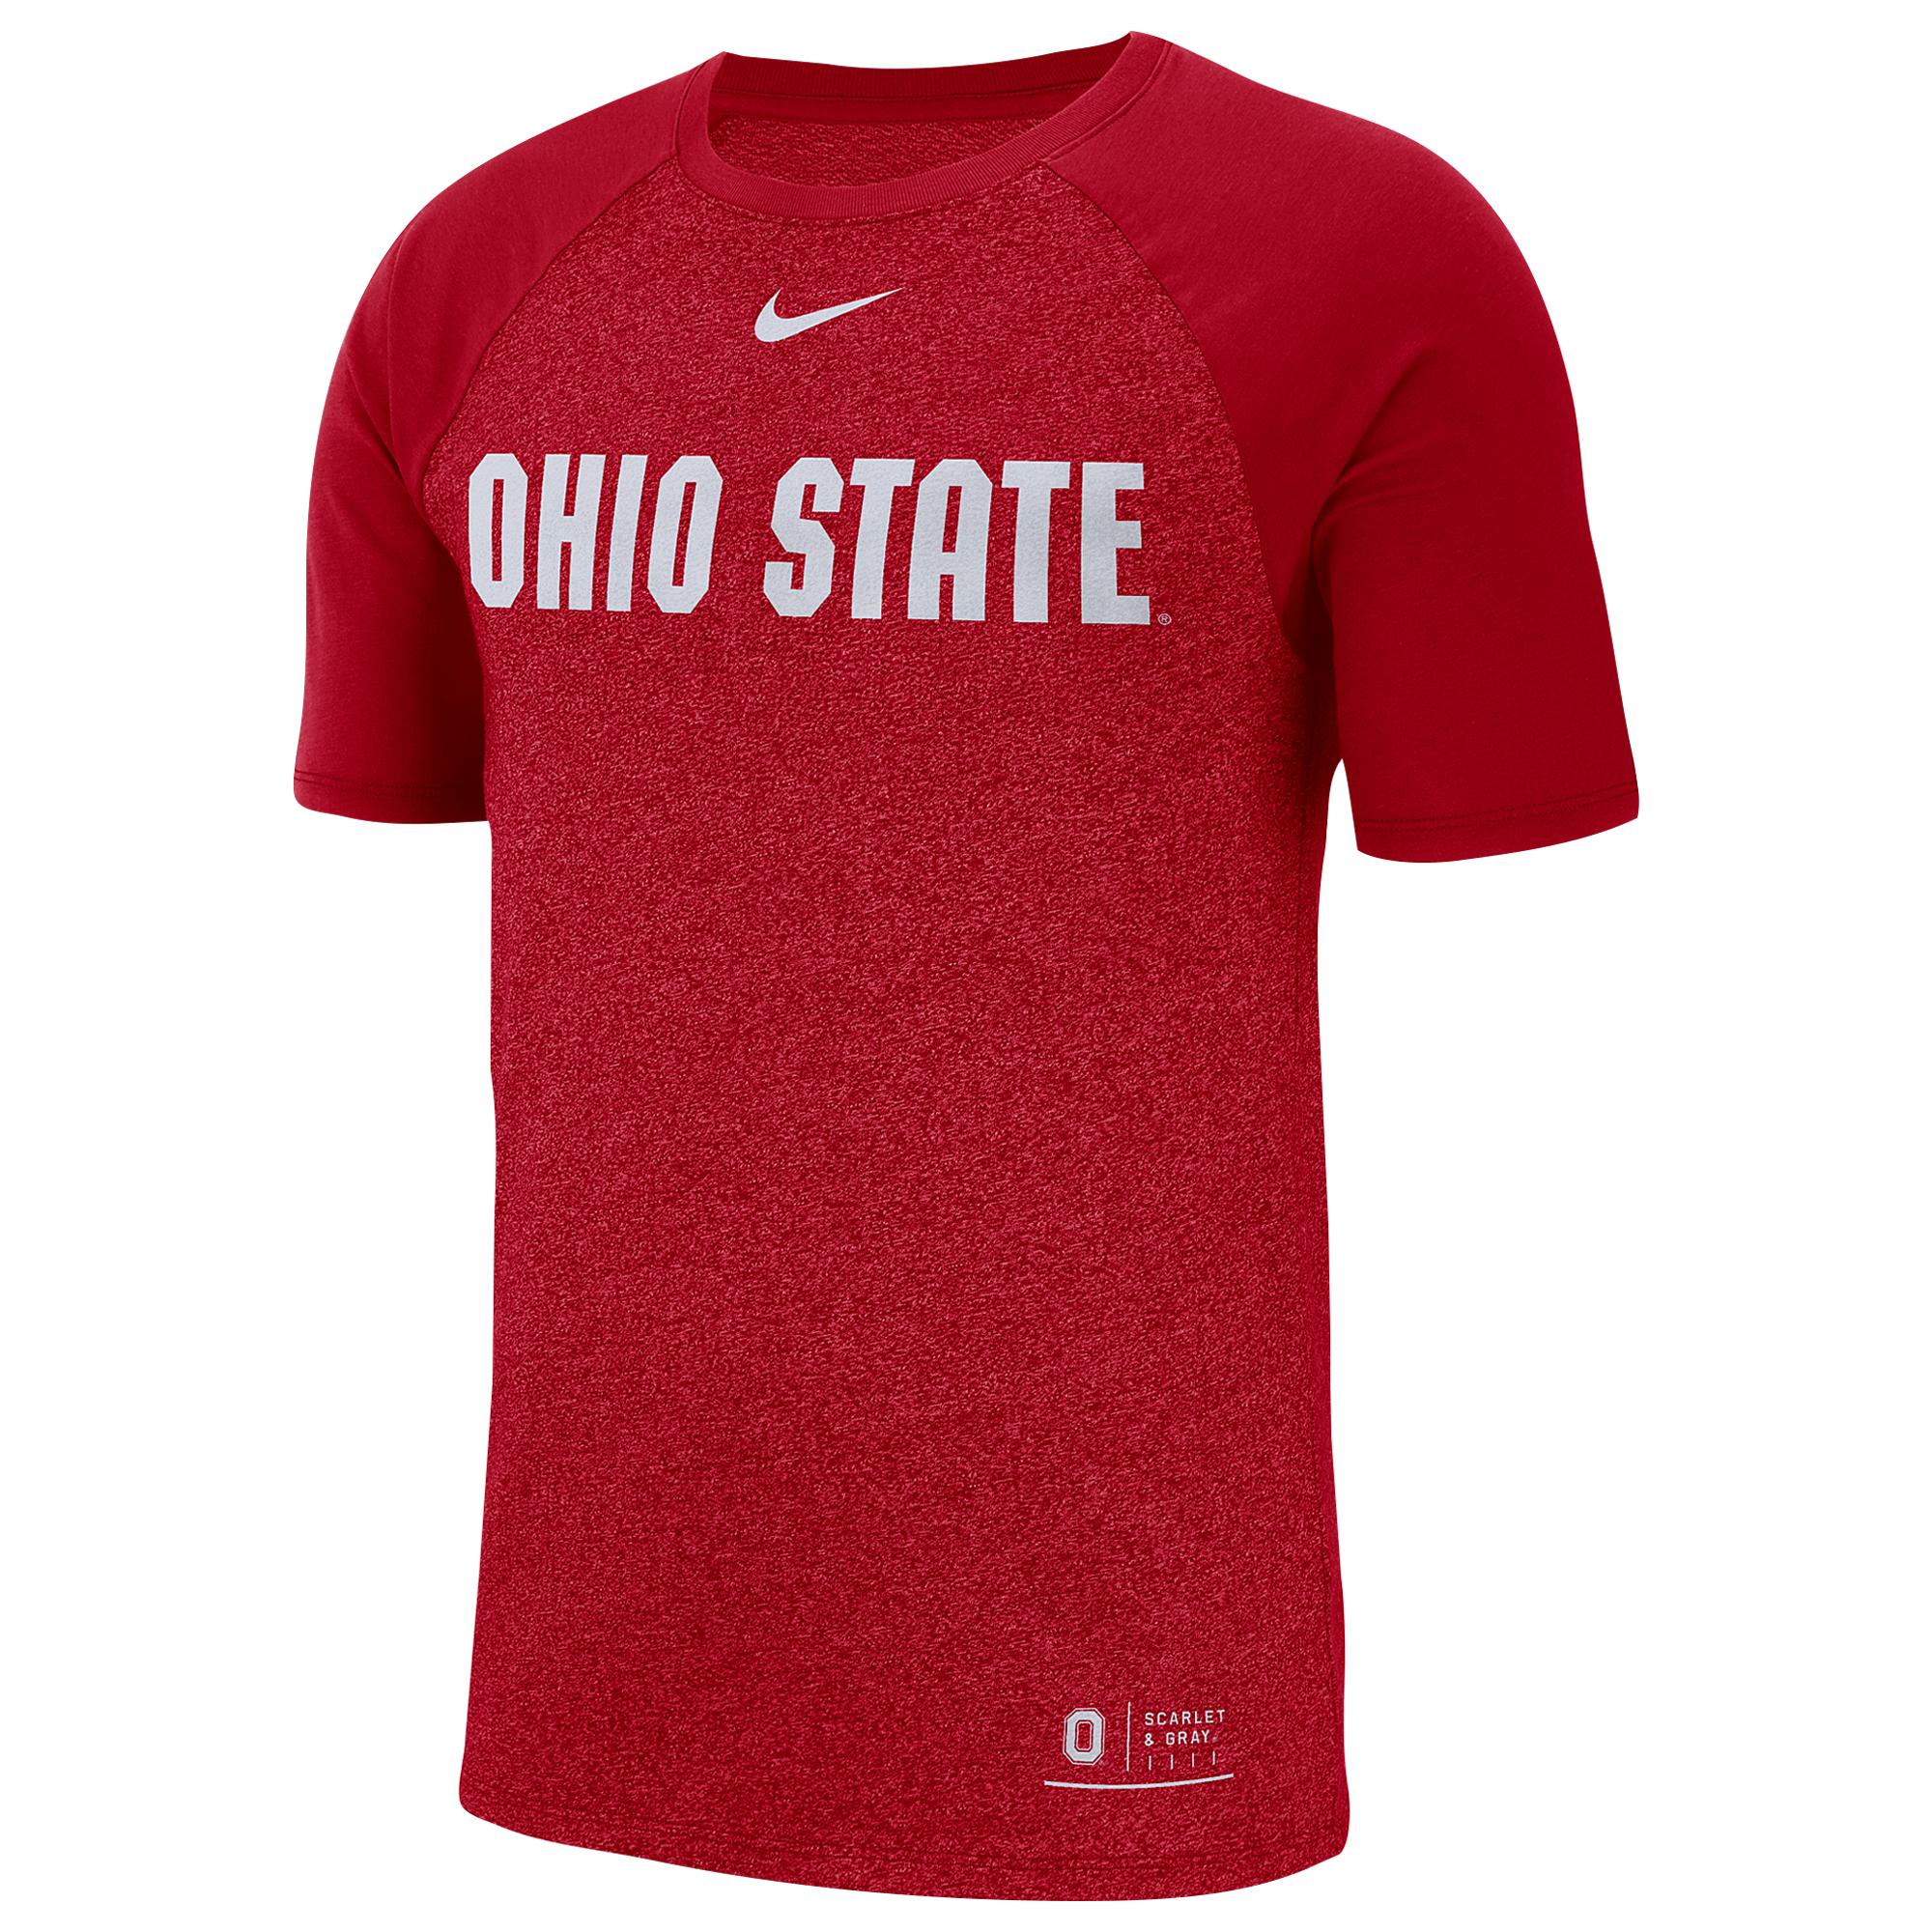 Nike Ohio State Buckeyes College Marled T-shirt in Red for Men - Lyst